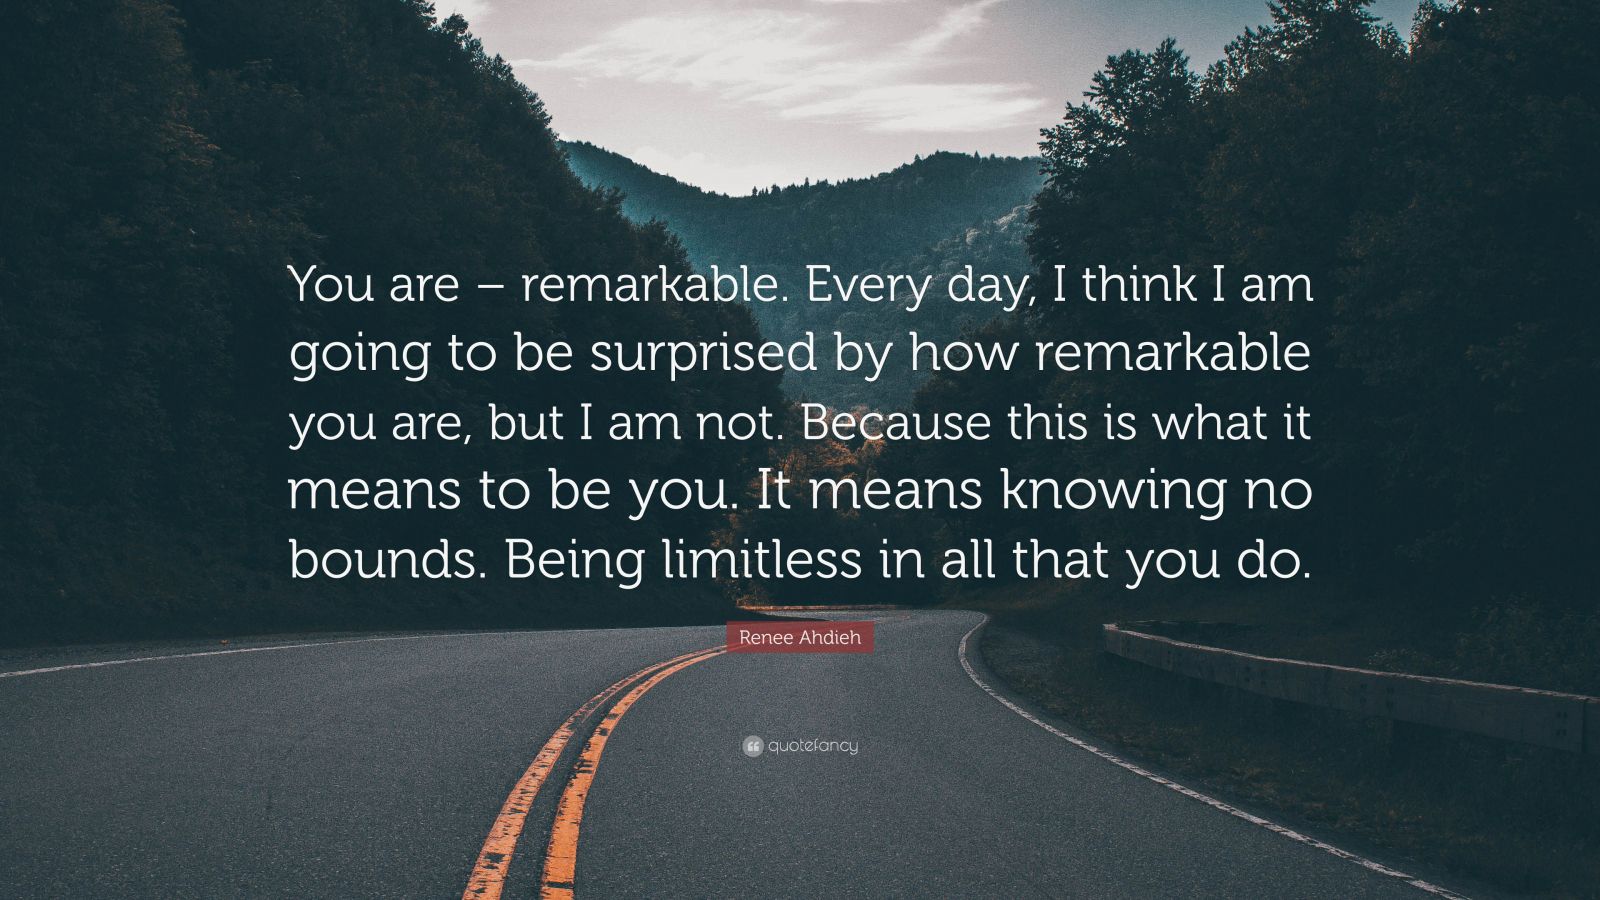 Renee Ahdieh Quote: "You are - remarkable. Every day, I think I am going to be surprised by how ...